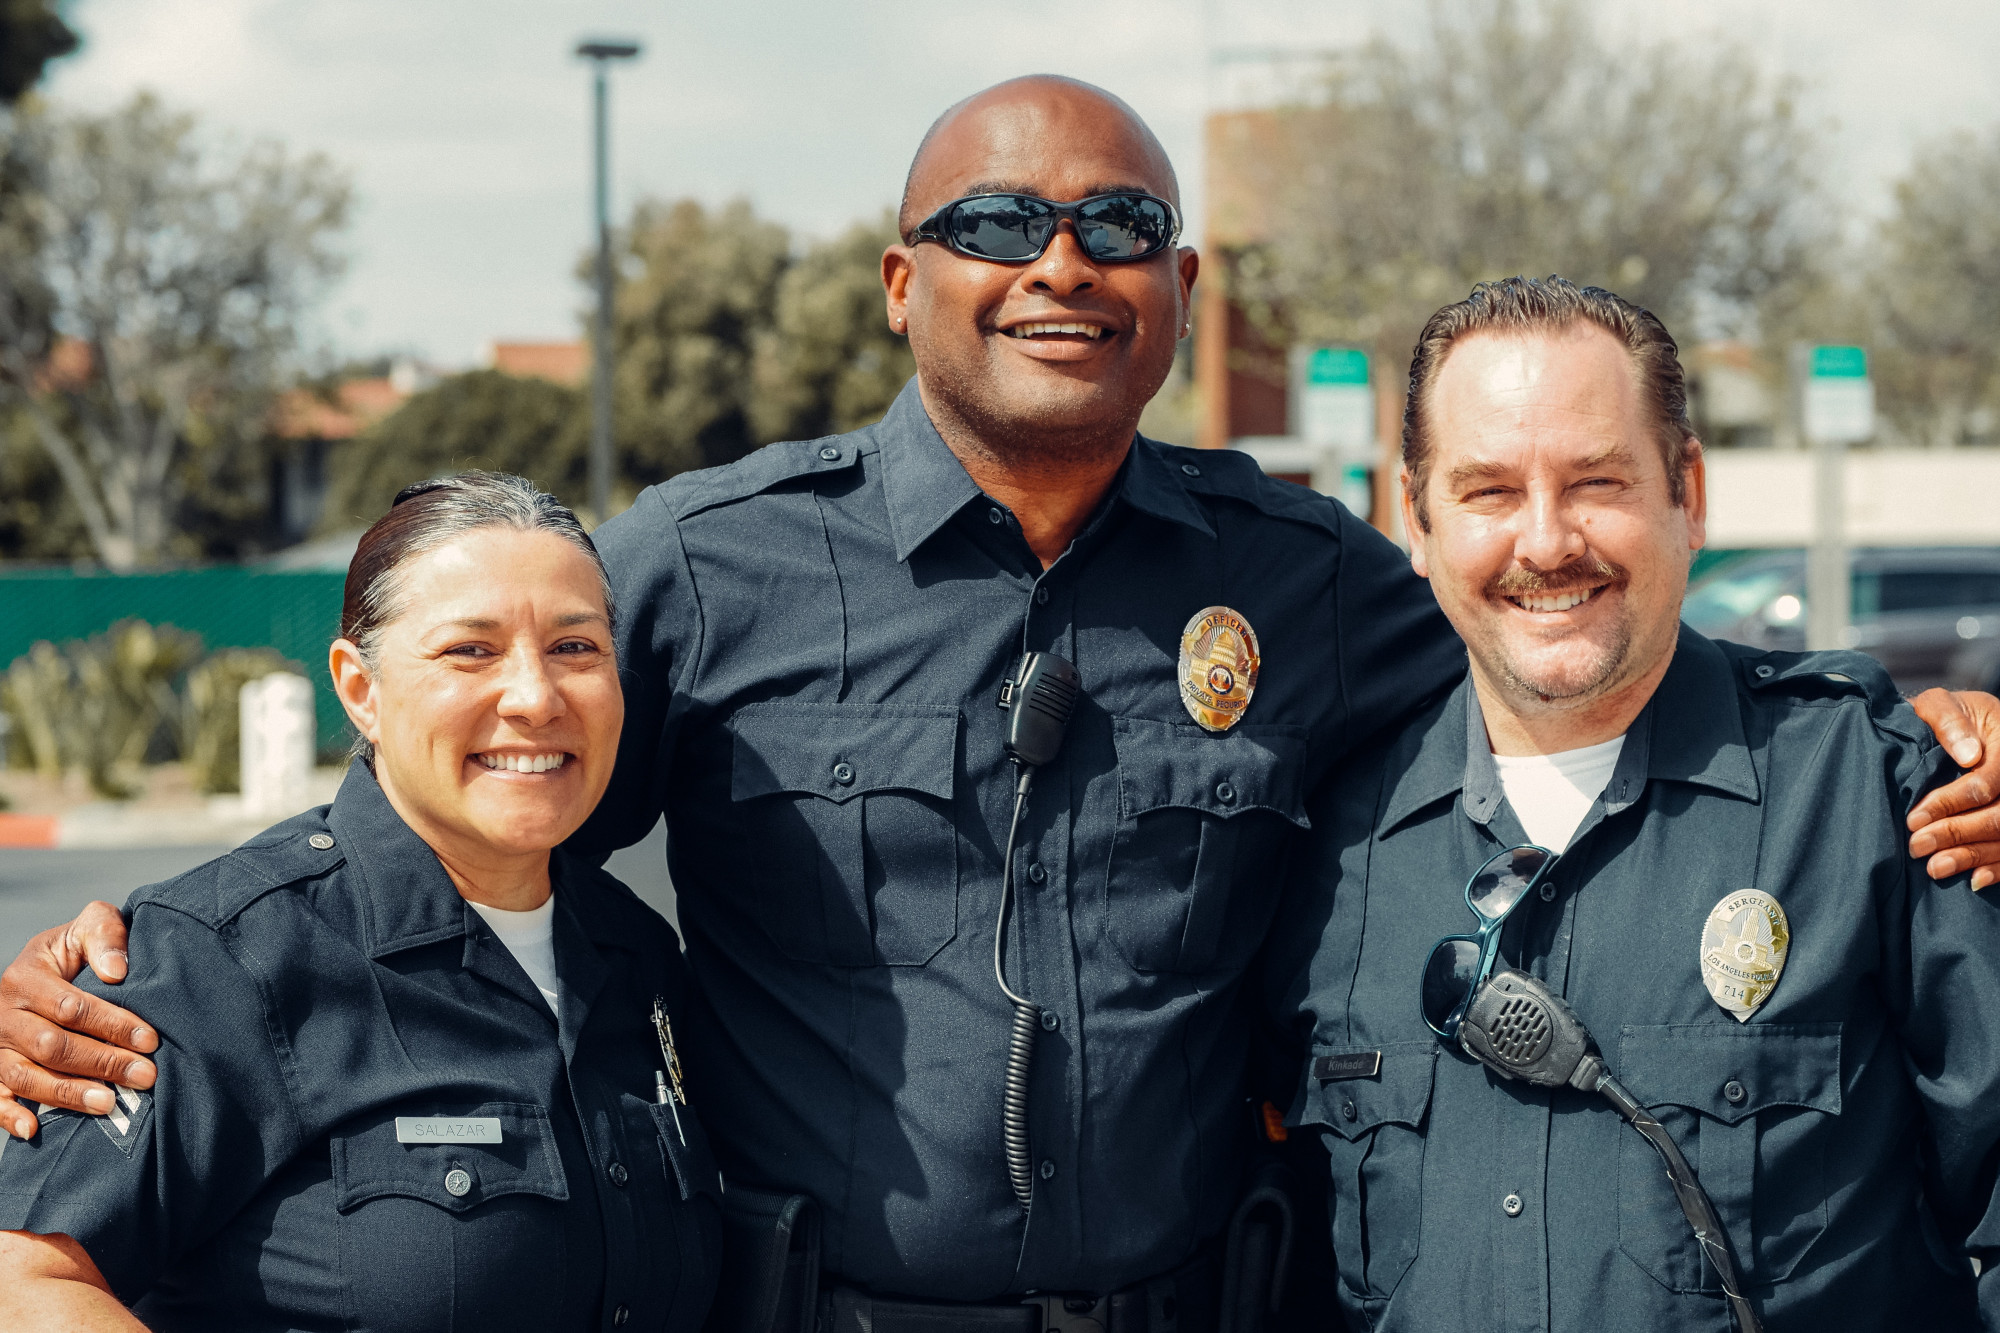 The photo features three law enforcement authorities standing together and smiling for a photo outside. Their body language exudes a sense of support, unity, and encouragement. They are positioned side by side with their expressions conveying an enthusiasm for their role in helping others. This positive image showcases the dedication and approachability of law enforcement authorities as they strive to provide assistance and support to the community.